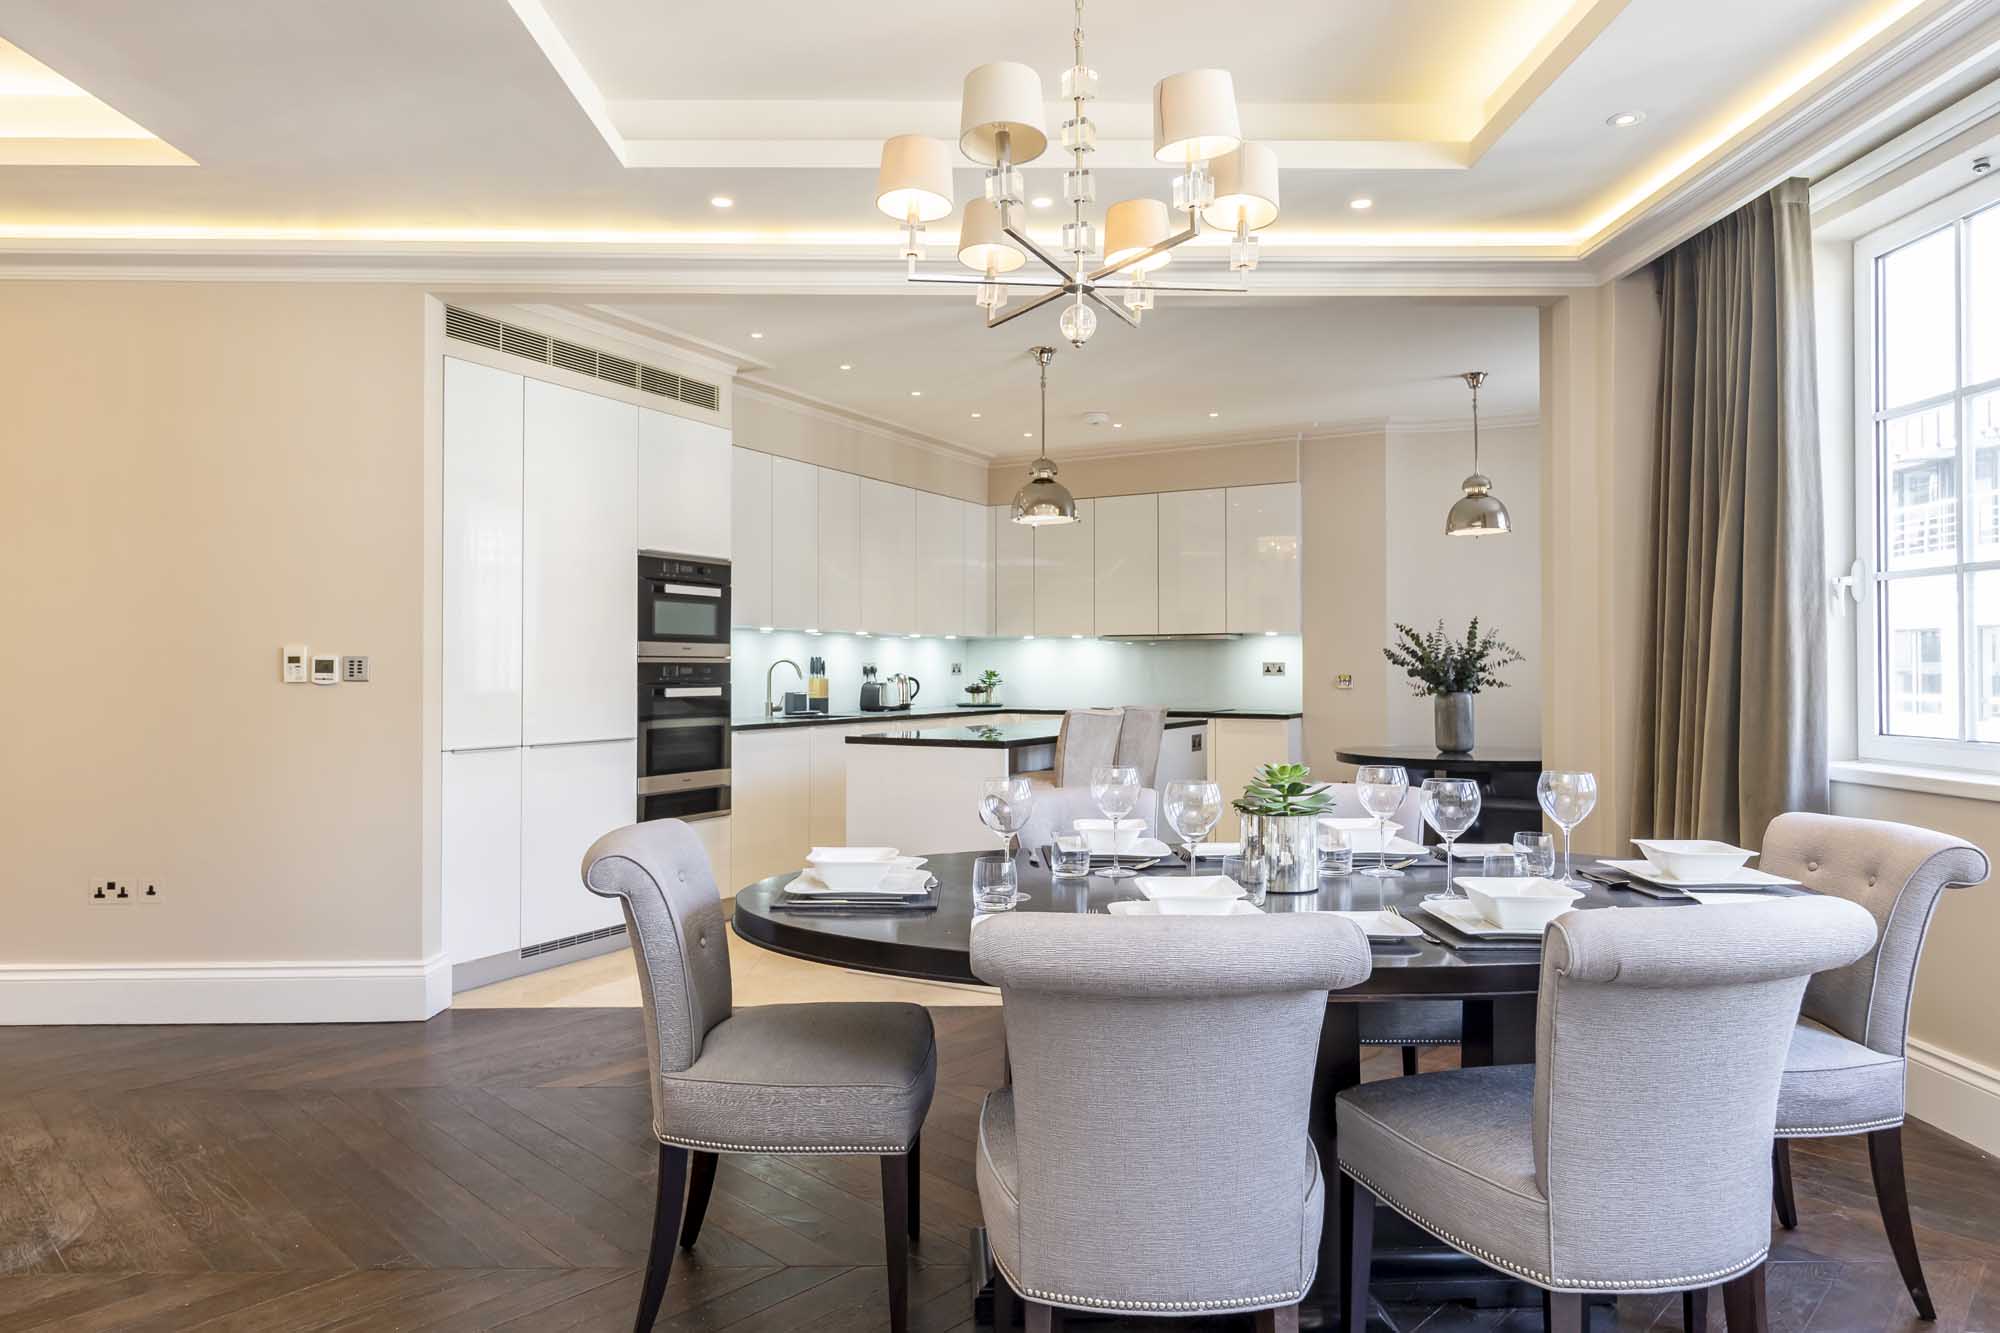 Rent an exclusive penthouse on Curzon Street, where Mayfair's old-world charm meets the new Roaring Twenties luxury living